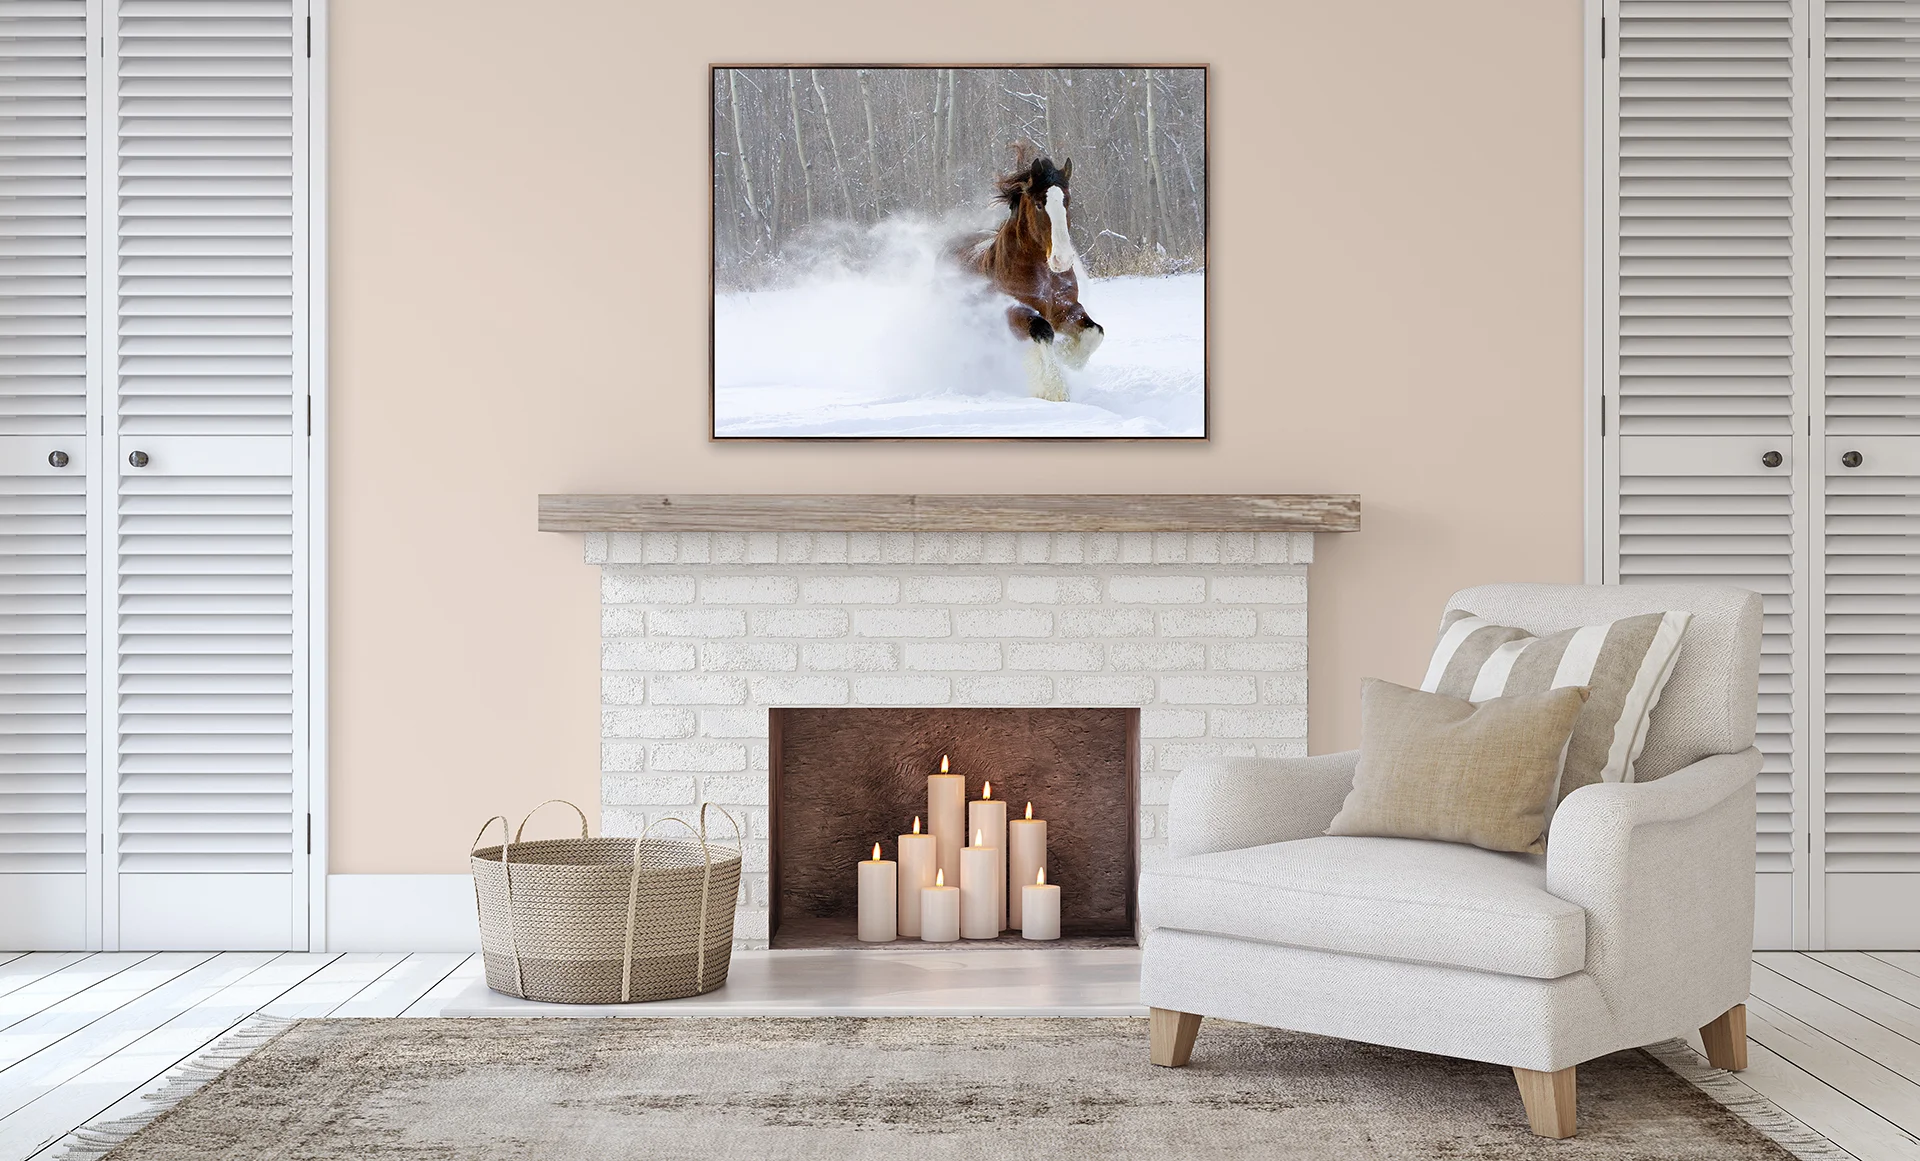 Horse portrait of a Clydesdale horse running through deep snow as a statement piece of wall art over a fireplace.